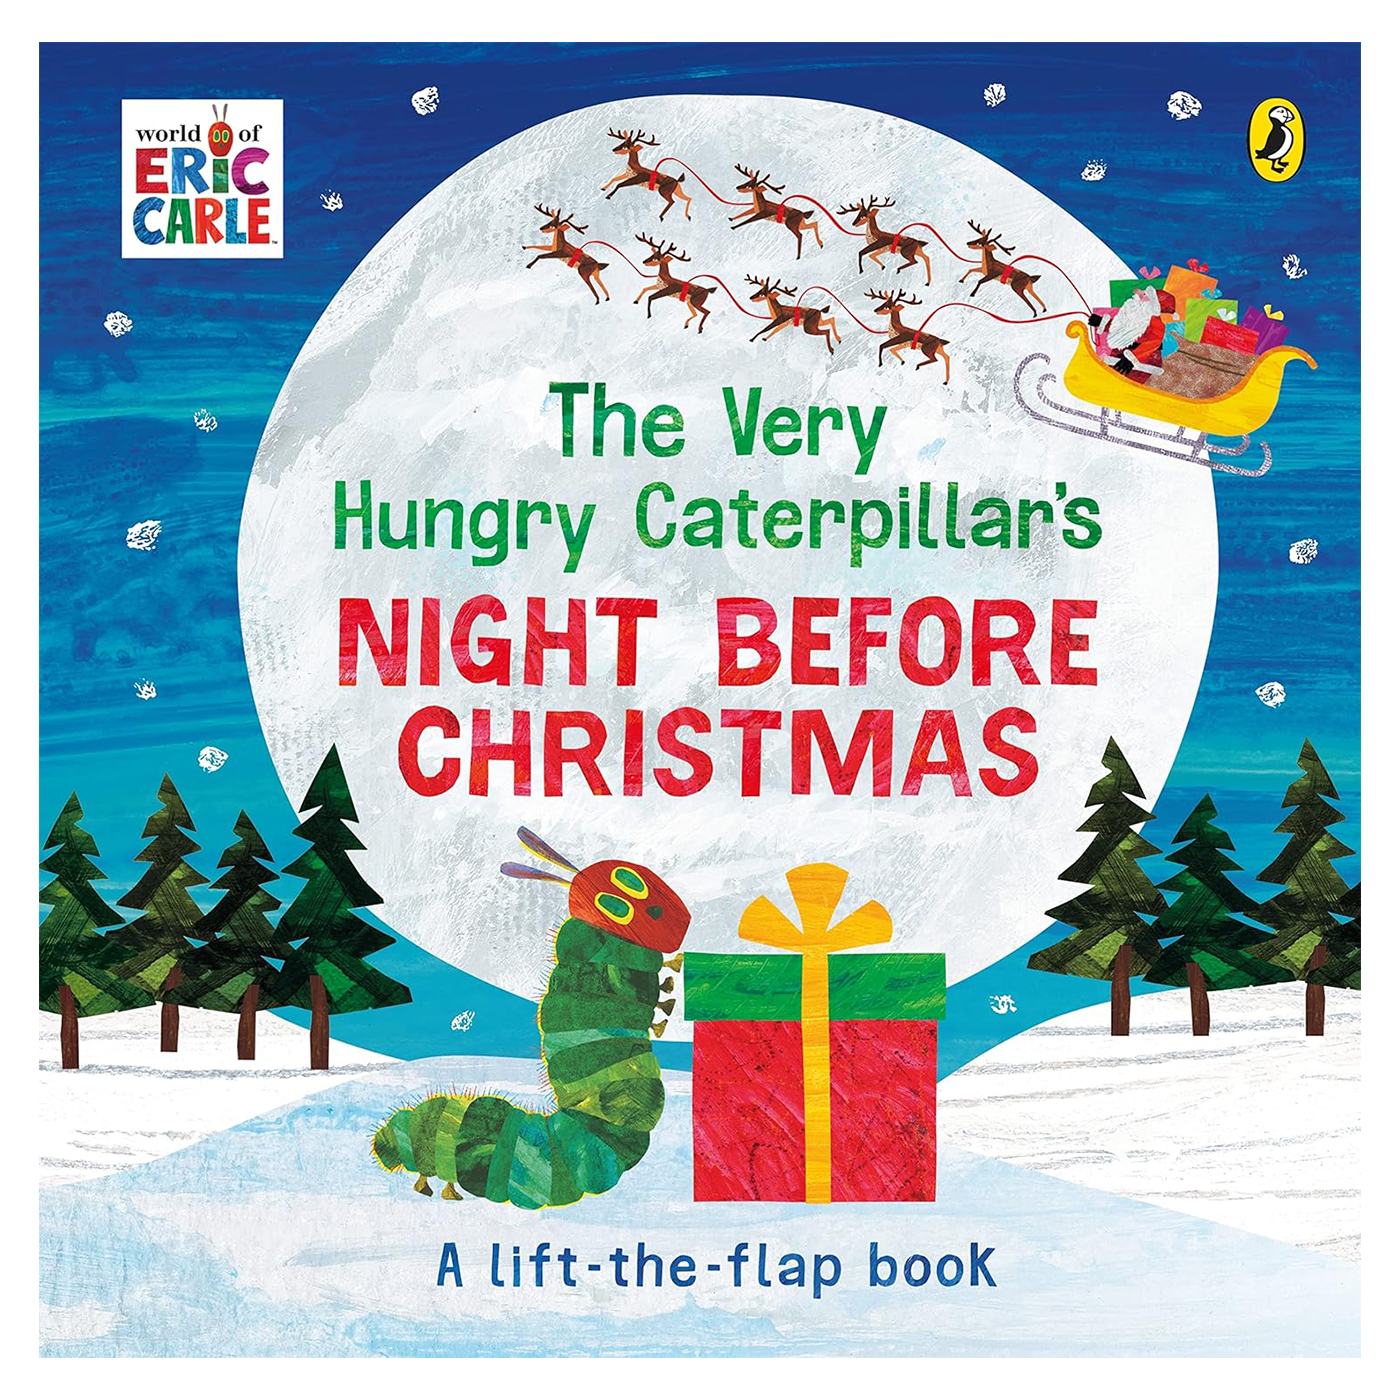  The Very Hungry Caterpillar's Night Before Christmas